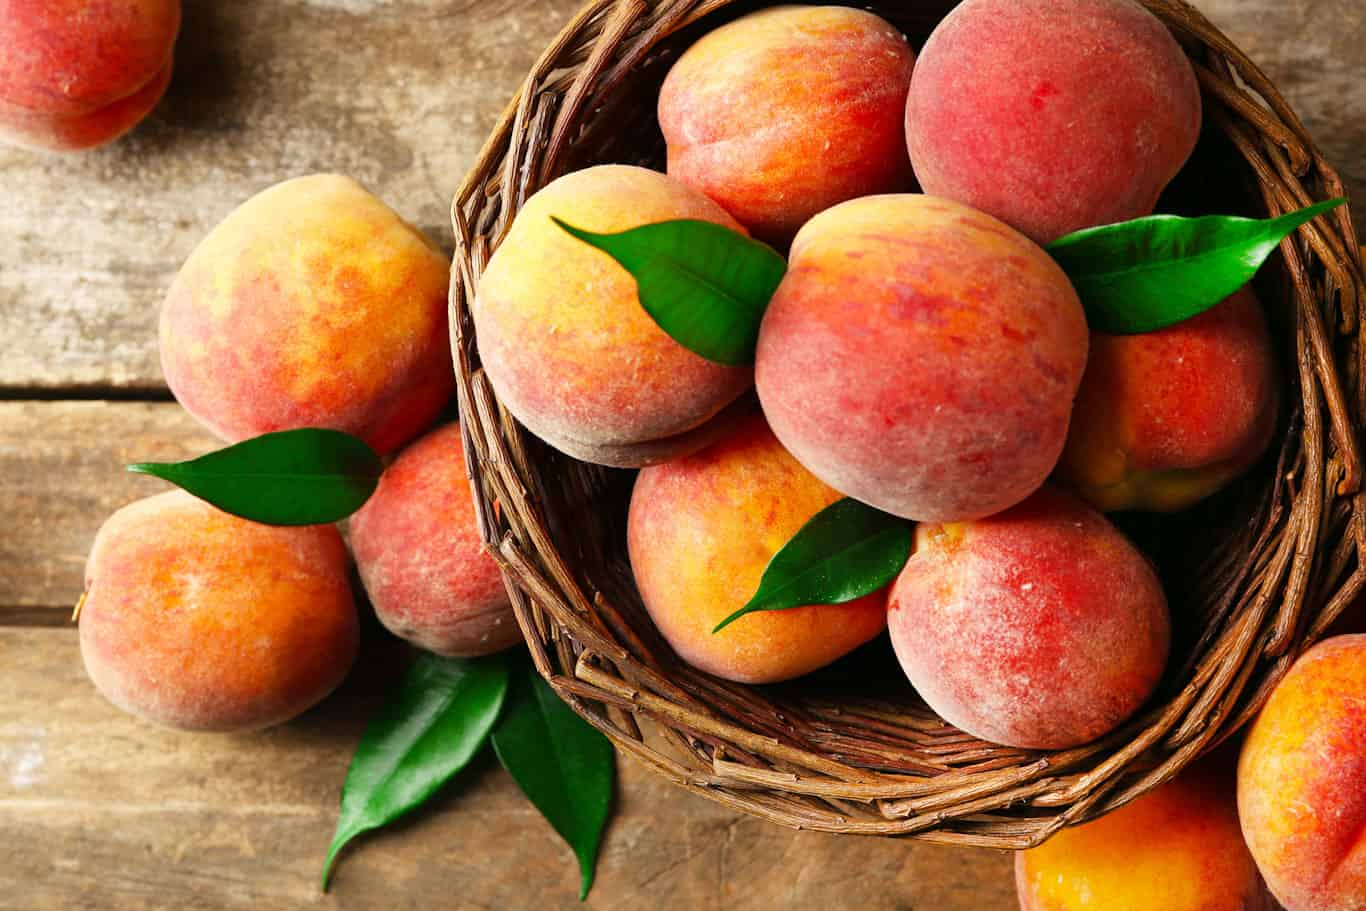 Are Peaches Safe For Parrots To Eat?